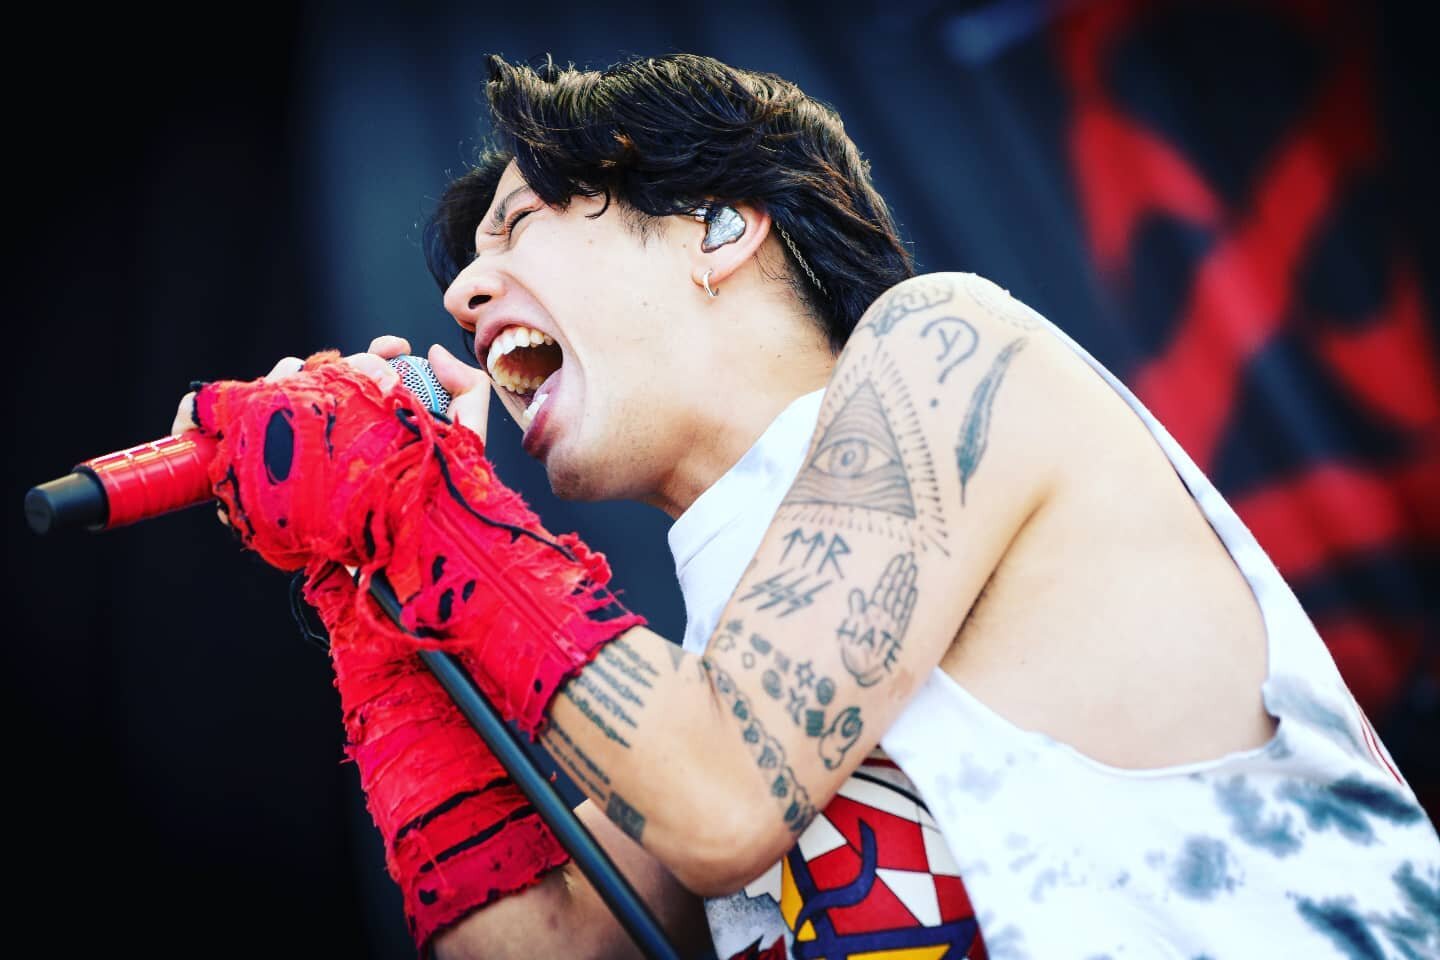 @oneokrockofficial @ @goodthingsfestival 
Ph:@rollauro for @amnplify